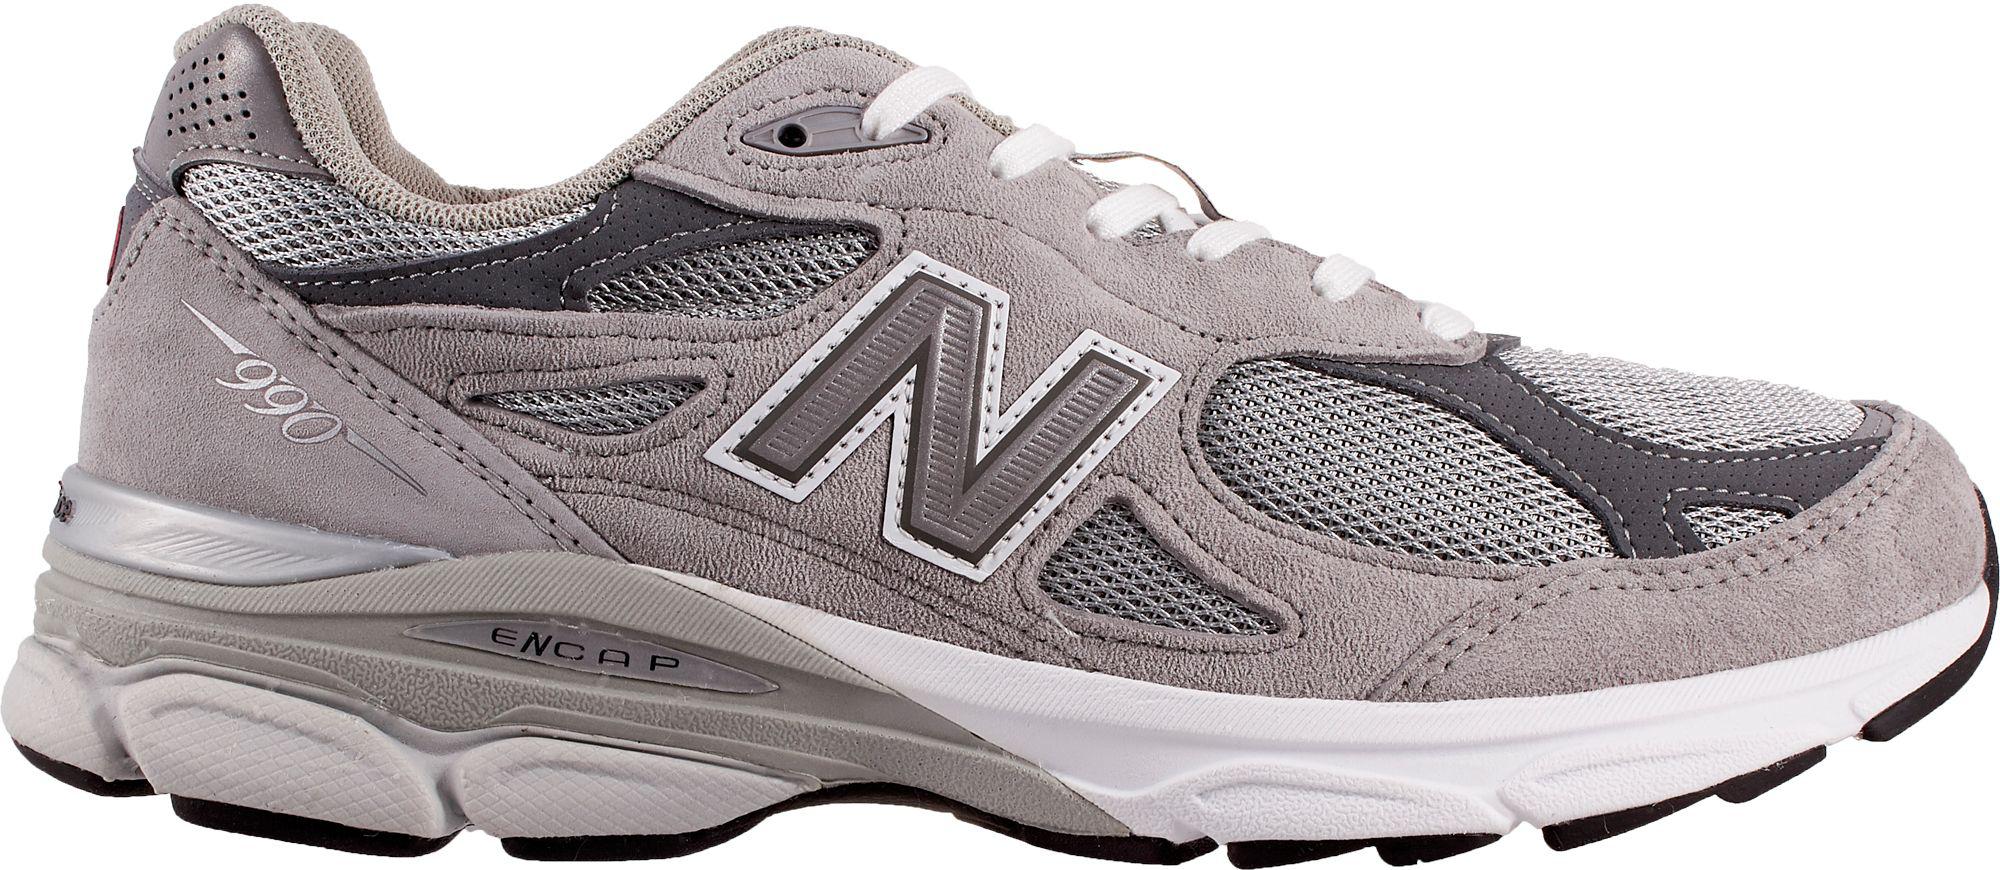 New Balance Rubber 990v3 Running Shoes In Grey White Gray For